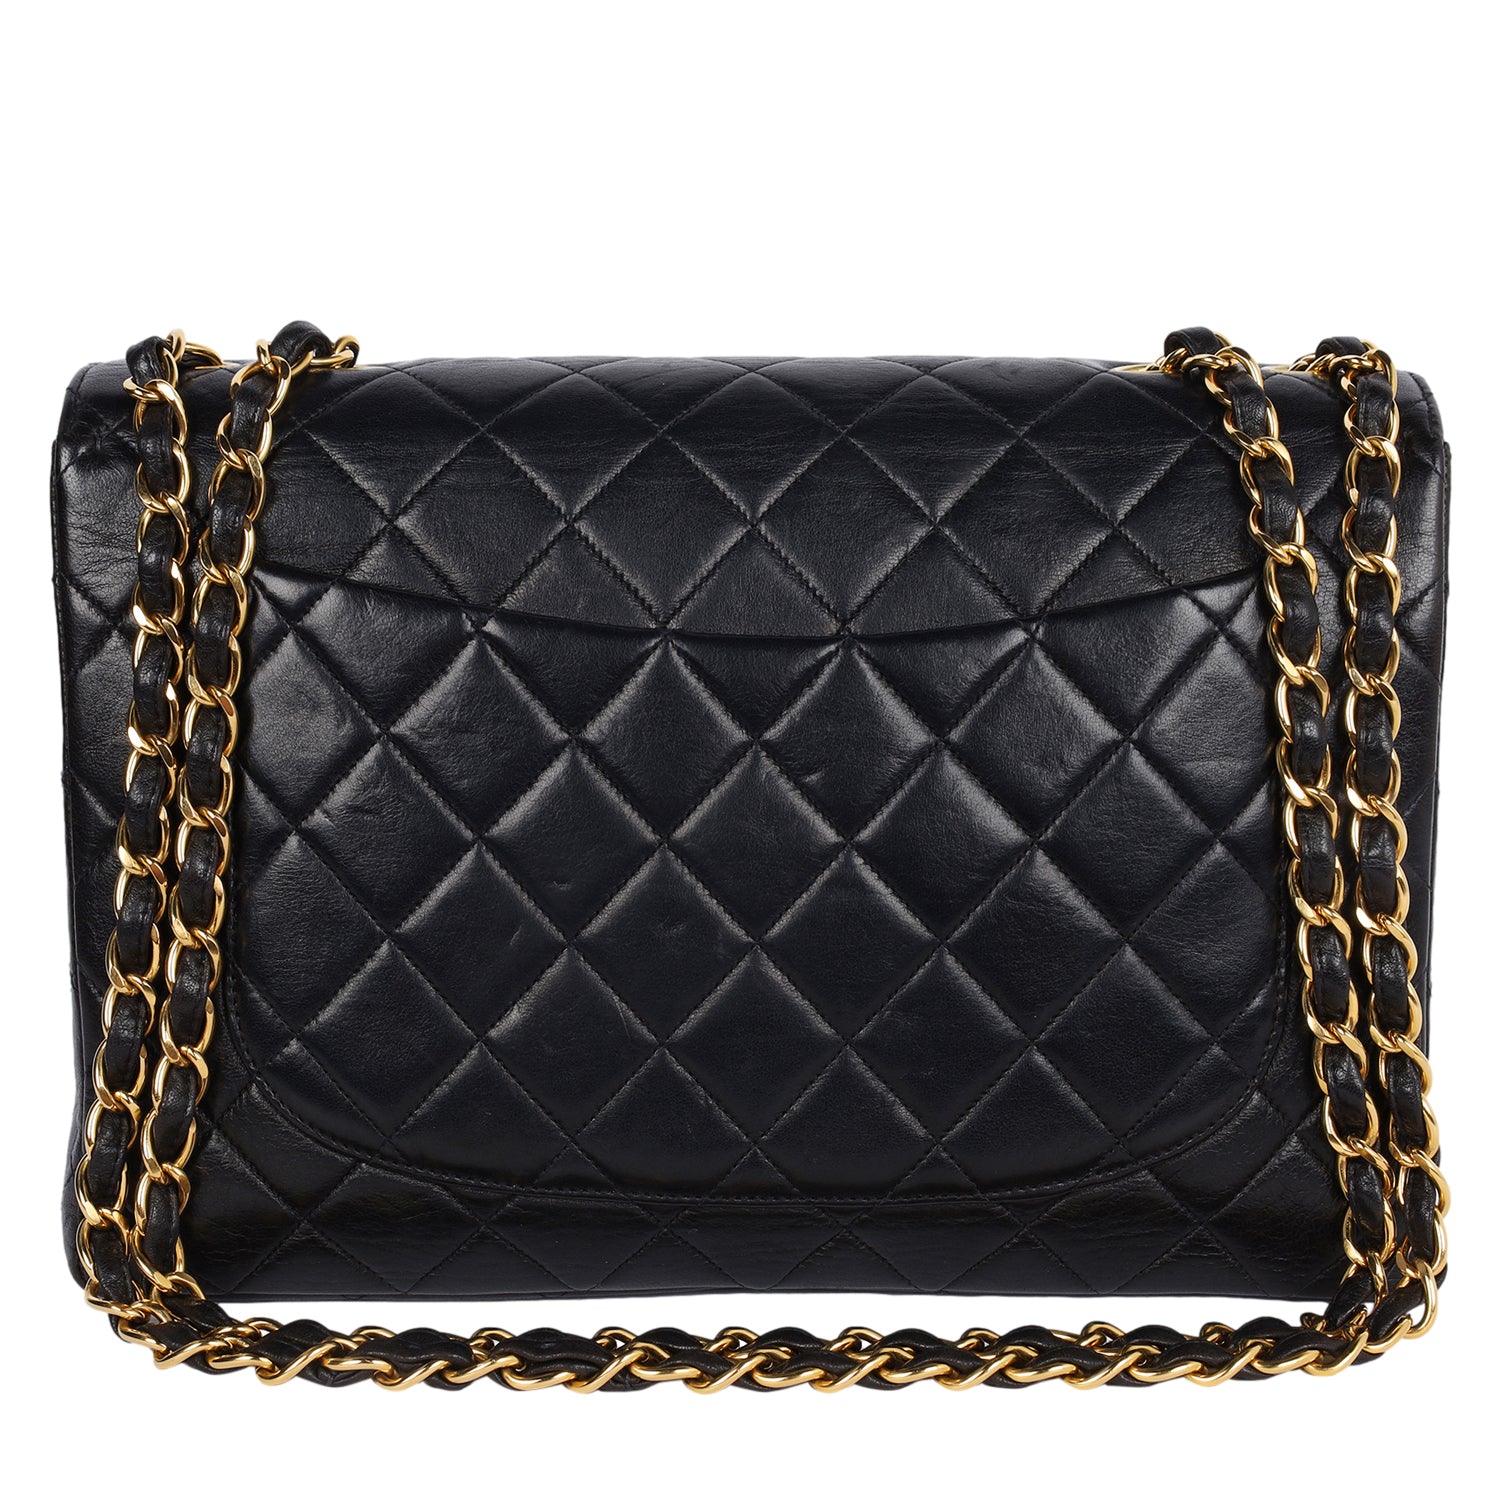 Chanel Vintage Chanel Black Caviar Quilted Leather Waist Pouch